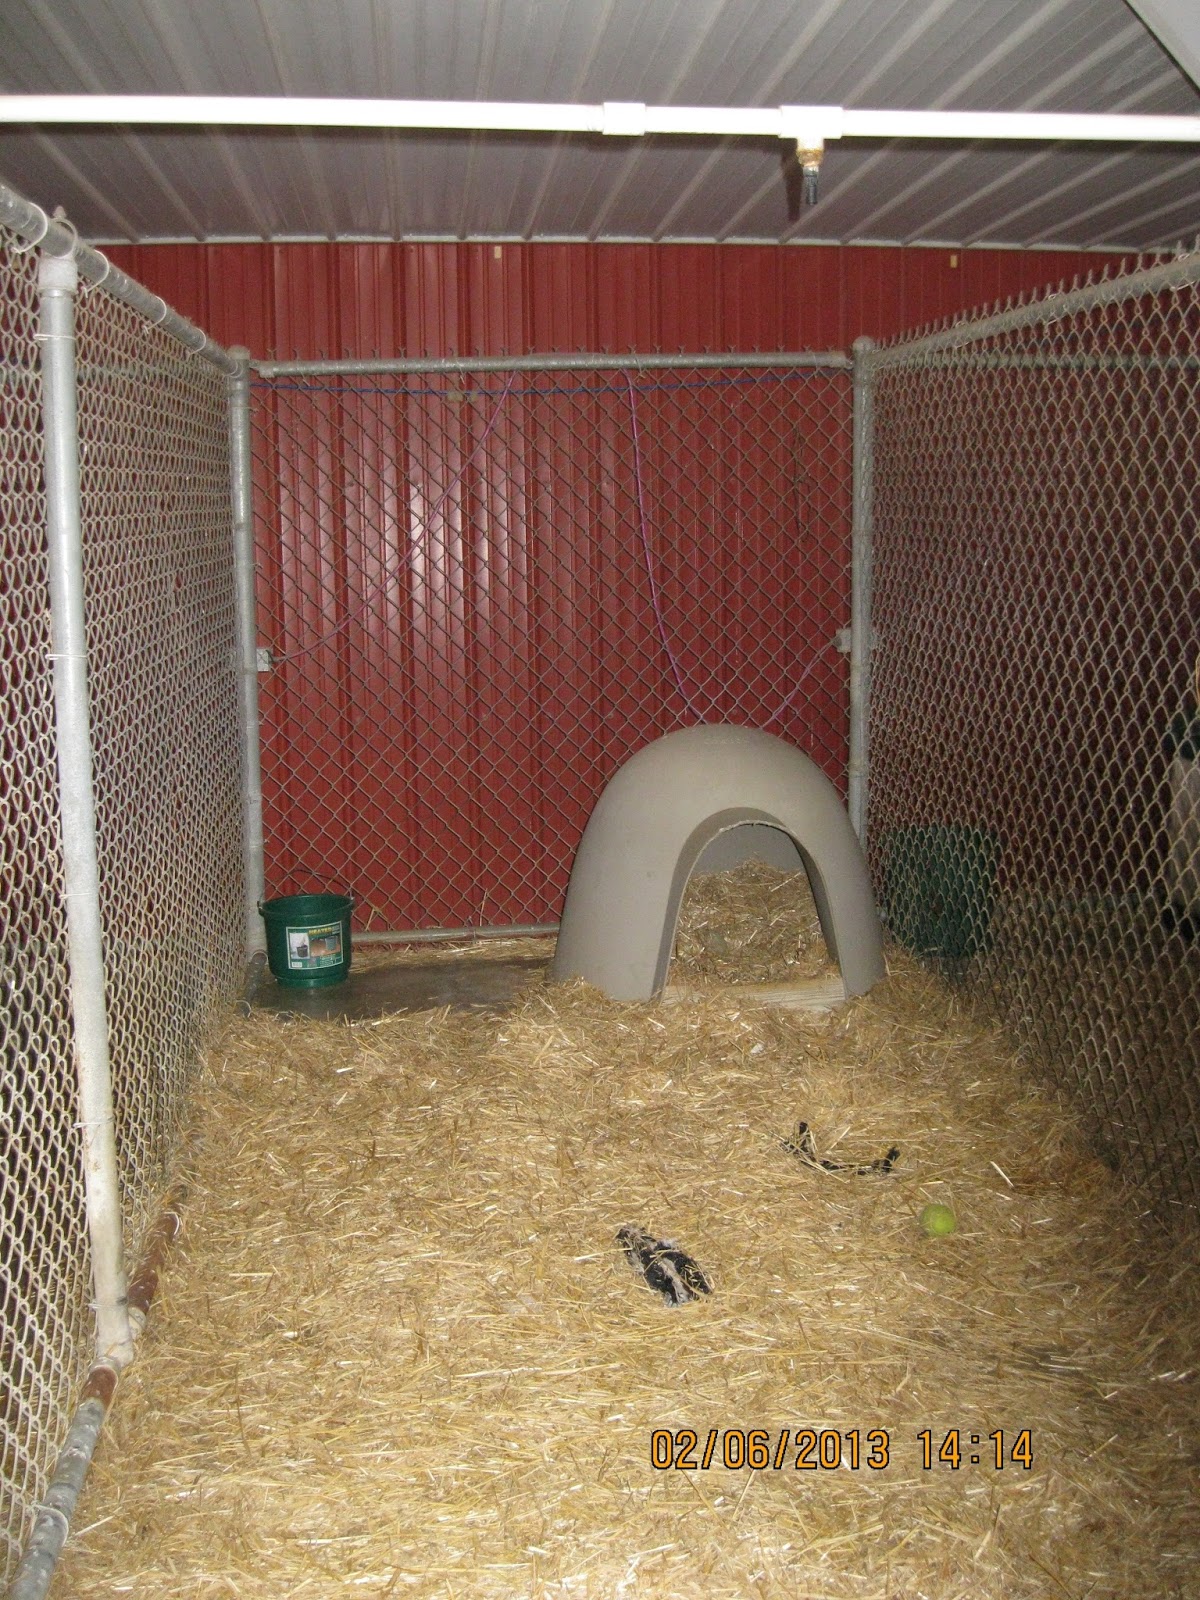 photo of a empty dog kennel